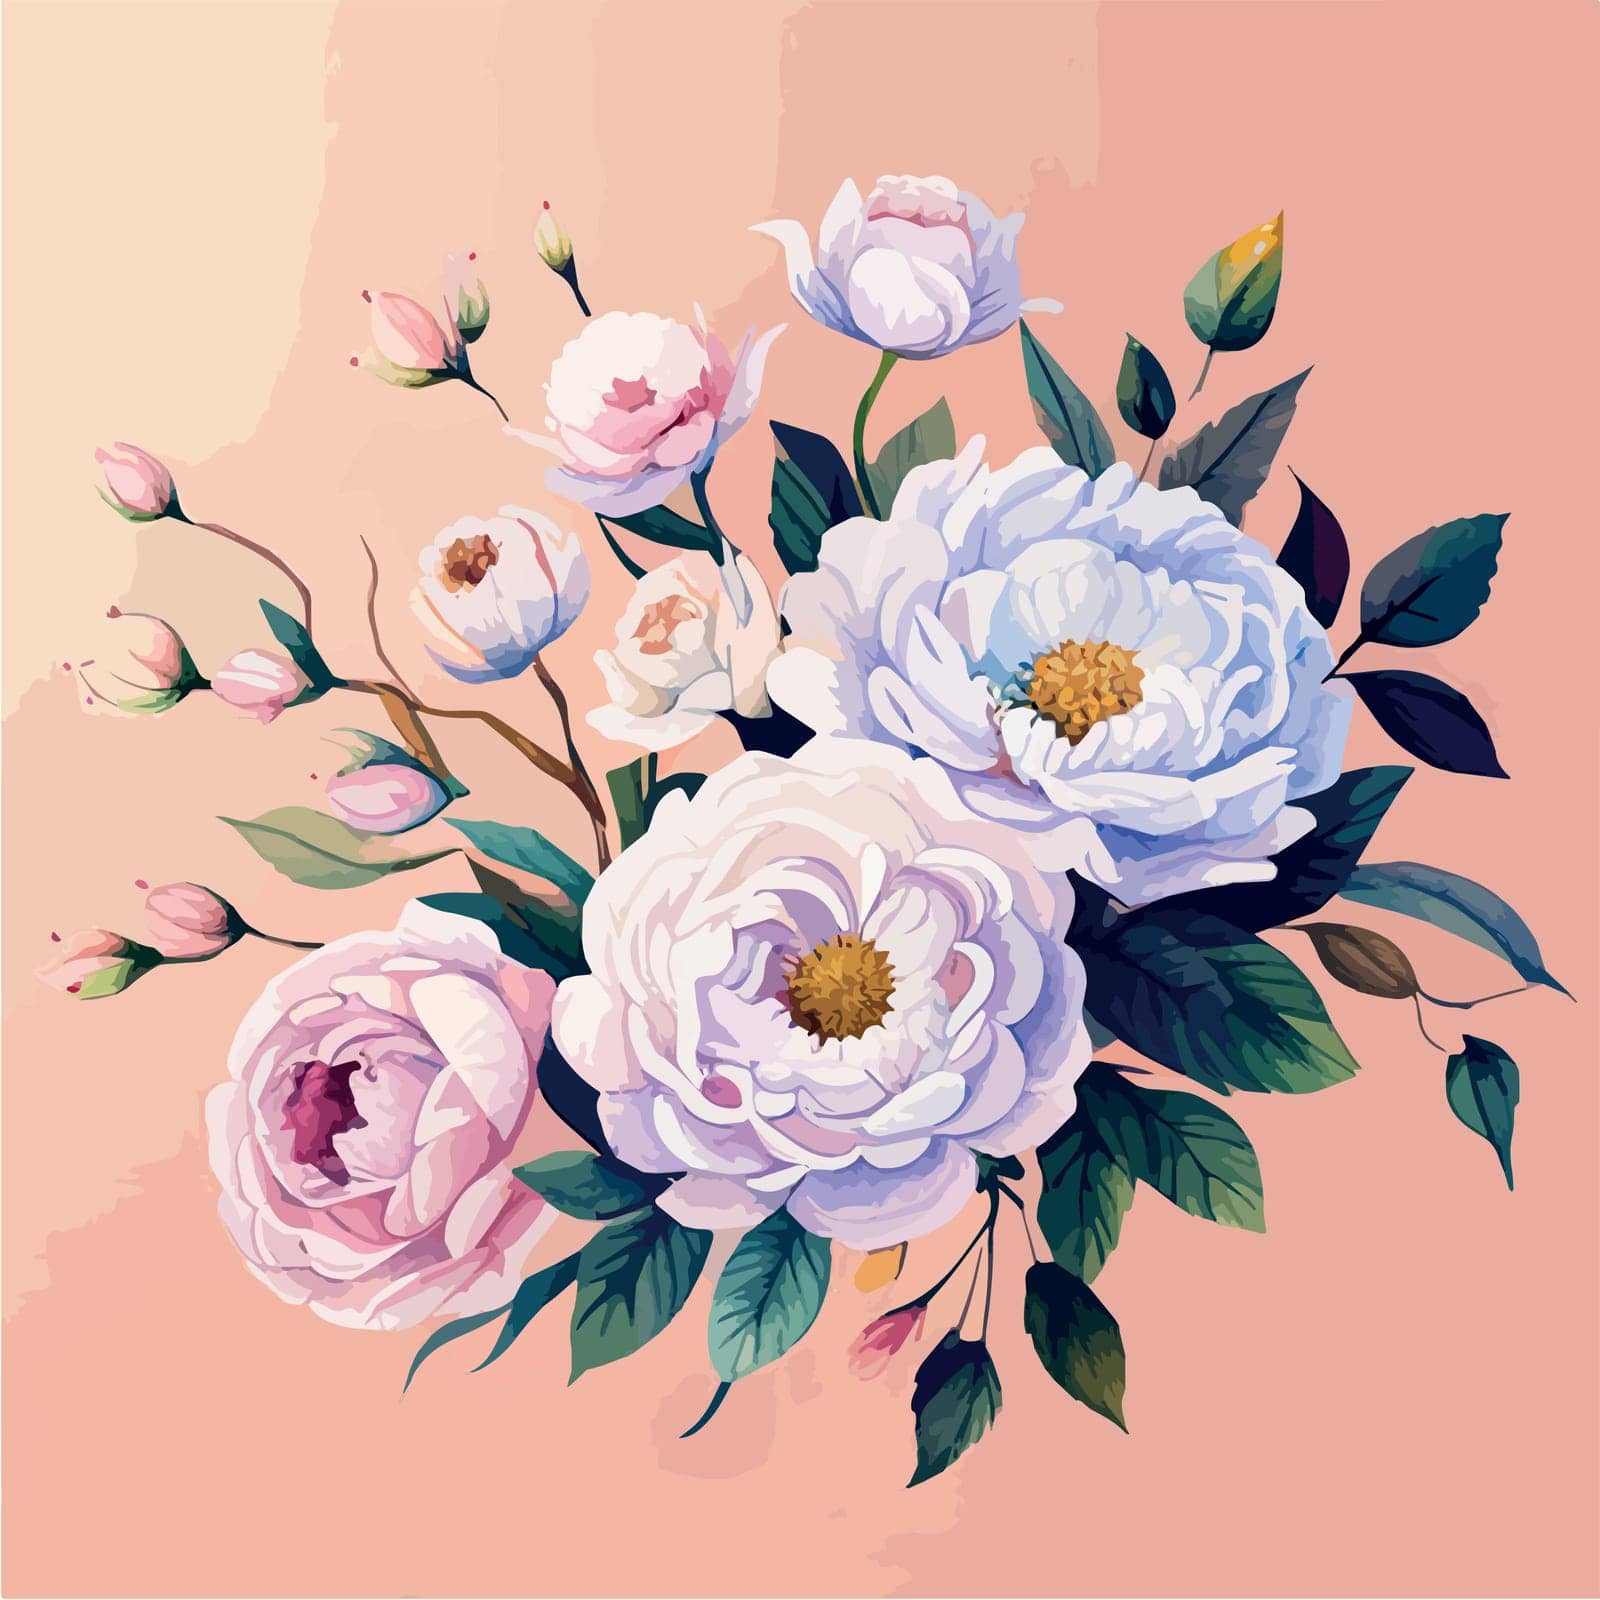 Colored with bouquet peonies. On colored background. Floral vintage bouquet. Vector illustration for greeting cards, wedding invitation cards and summer backgrounds.